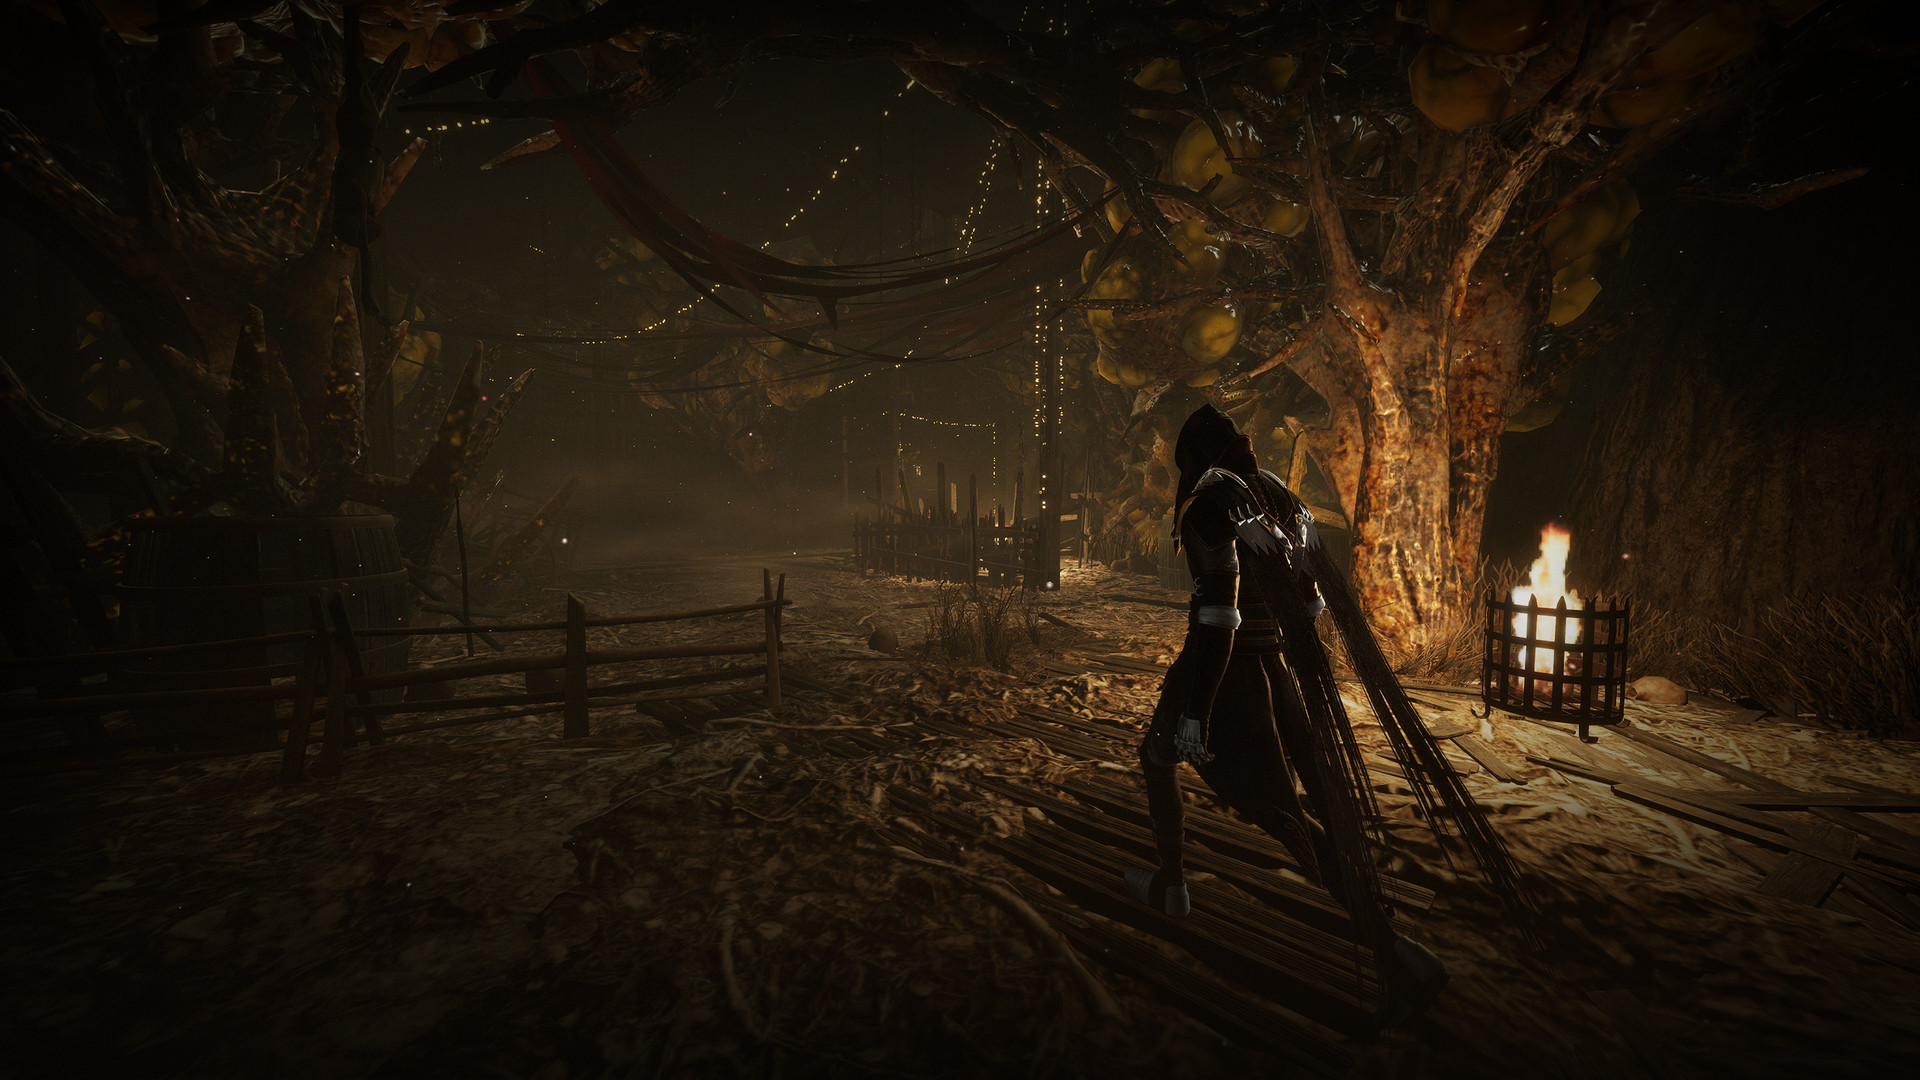 Thymesia brings Bloodborne-style combat to a plagued world